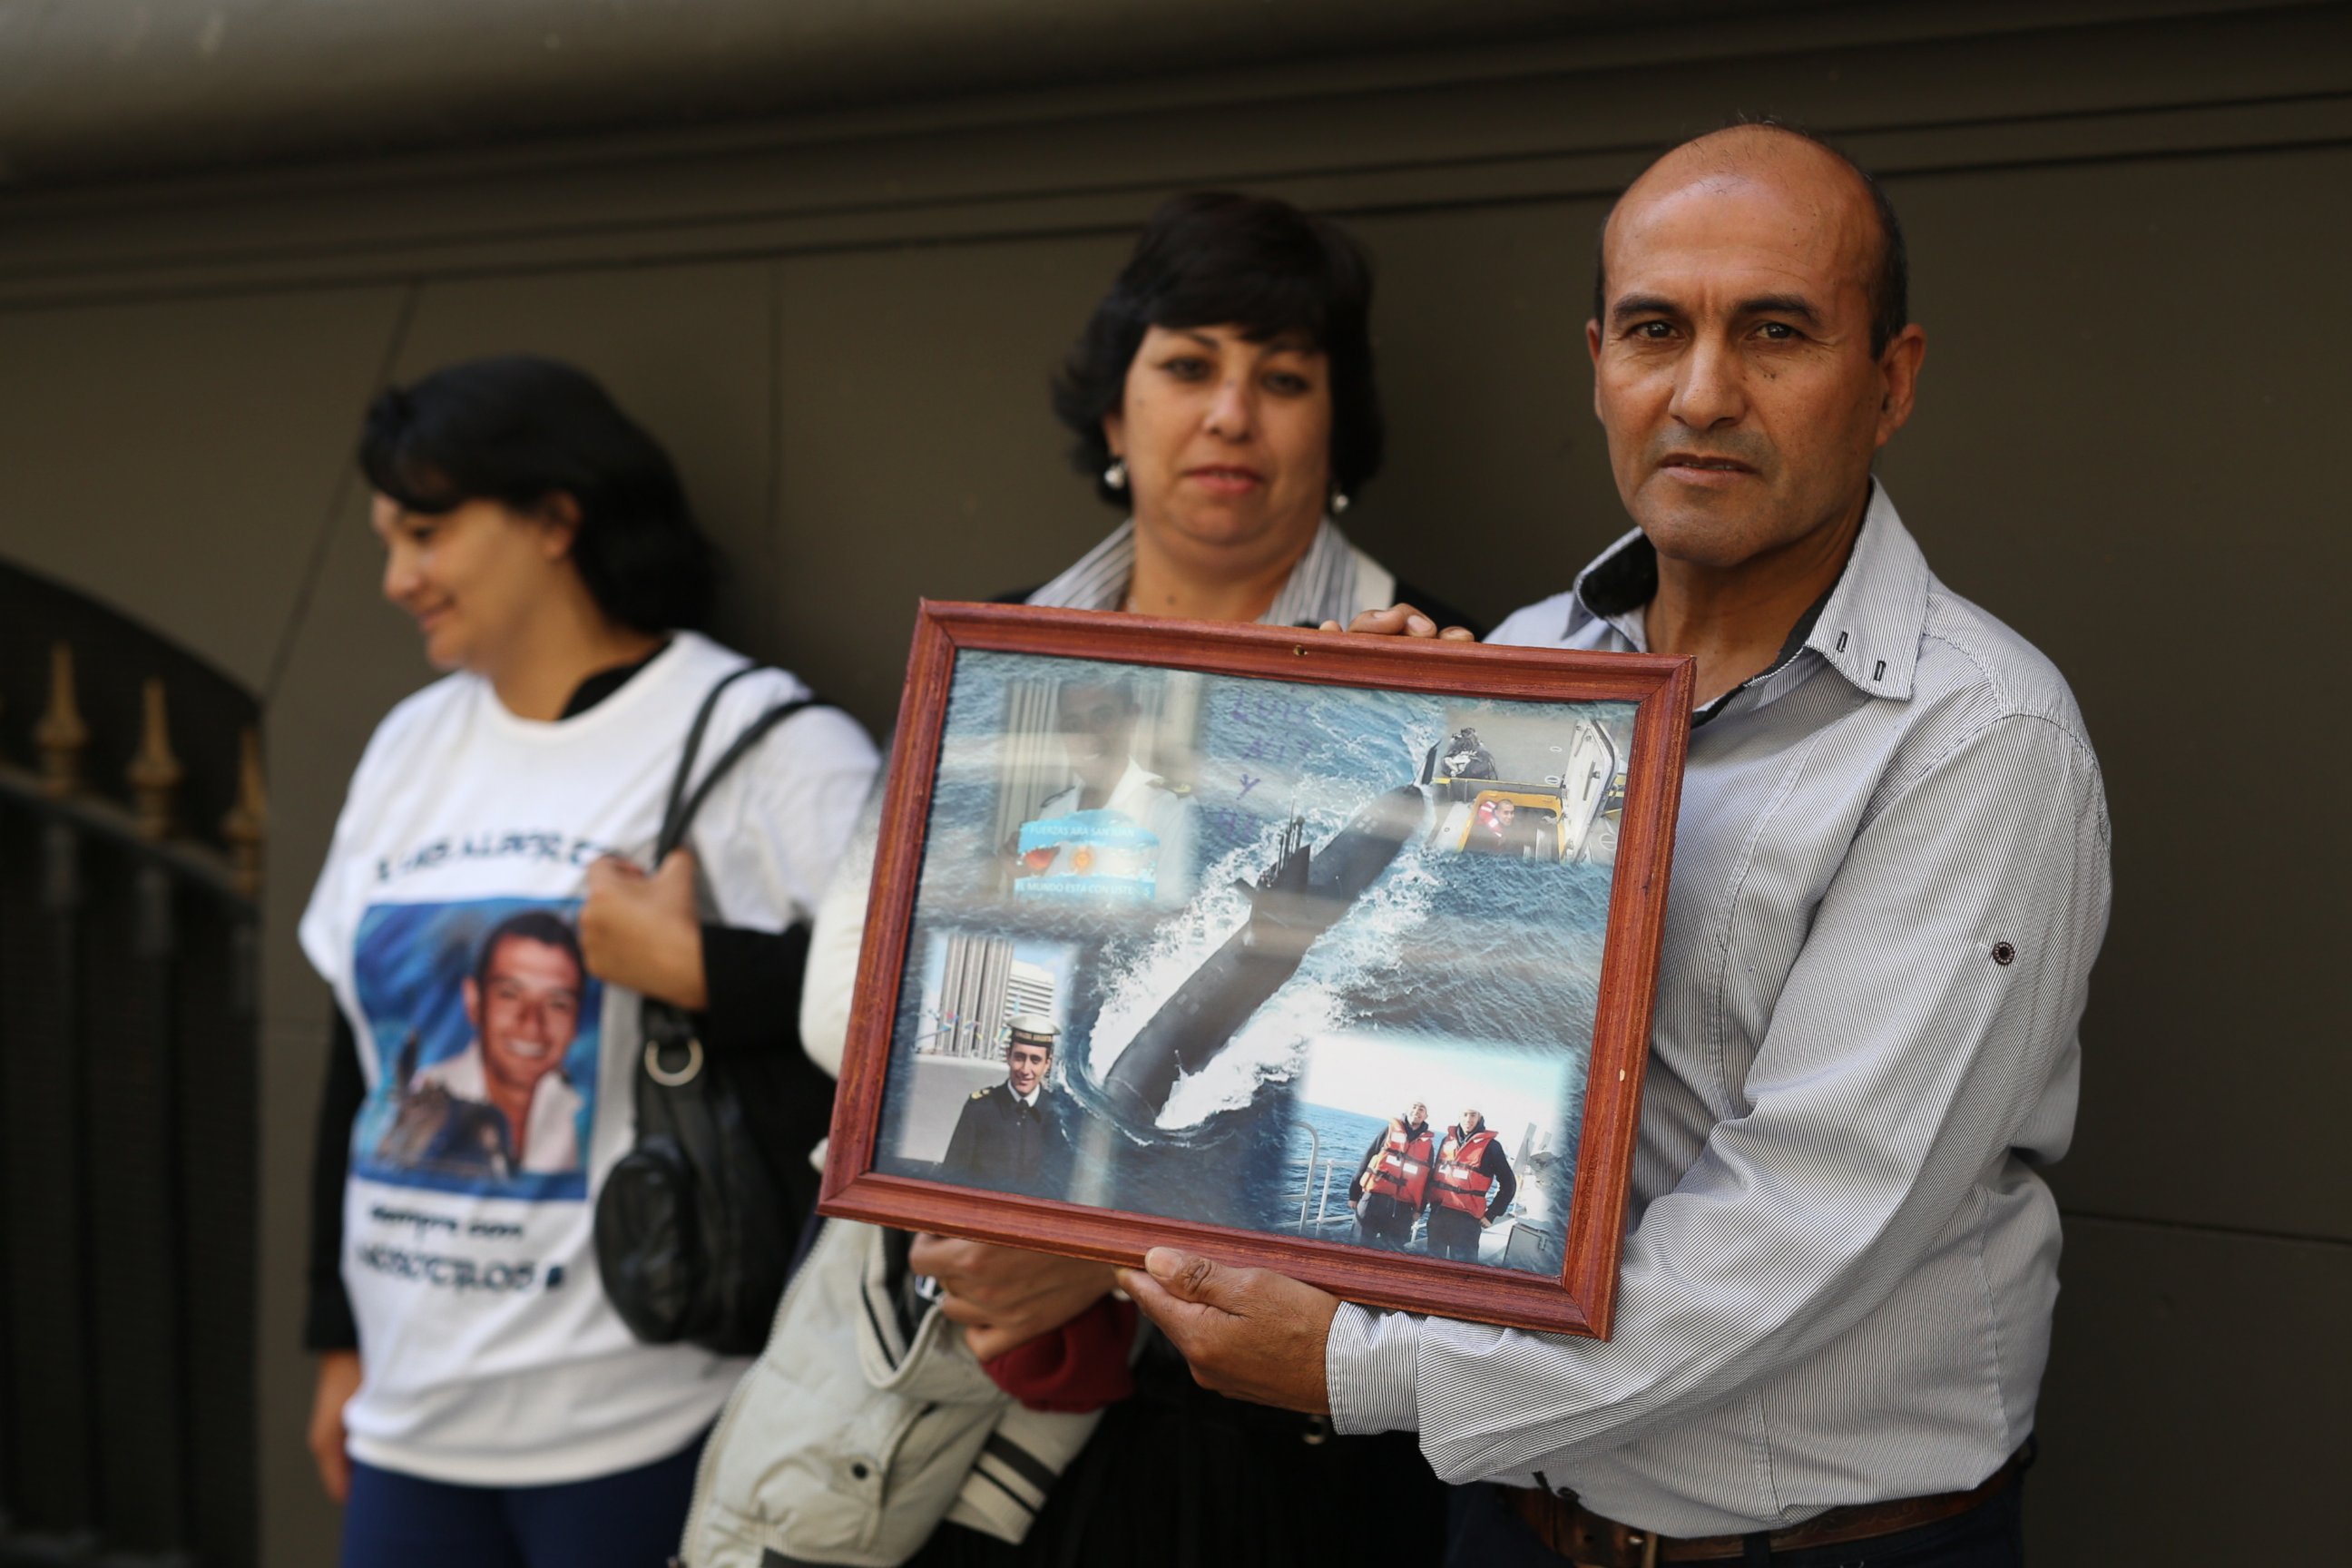 PHOTO: Antonio Niz, father of first Corporal Luis Niz, holds a collage of images of his son, a crew member of the missing ARA San Juan submarine, as family members stand outside Russia's embassy in Buenos Aires, Argentina, Monday, Jan. 15, 2018.